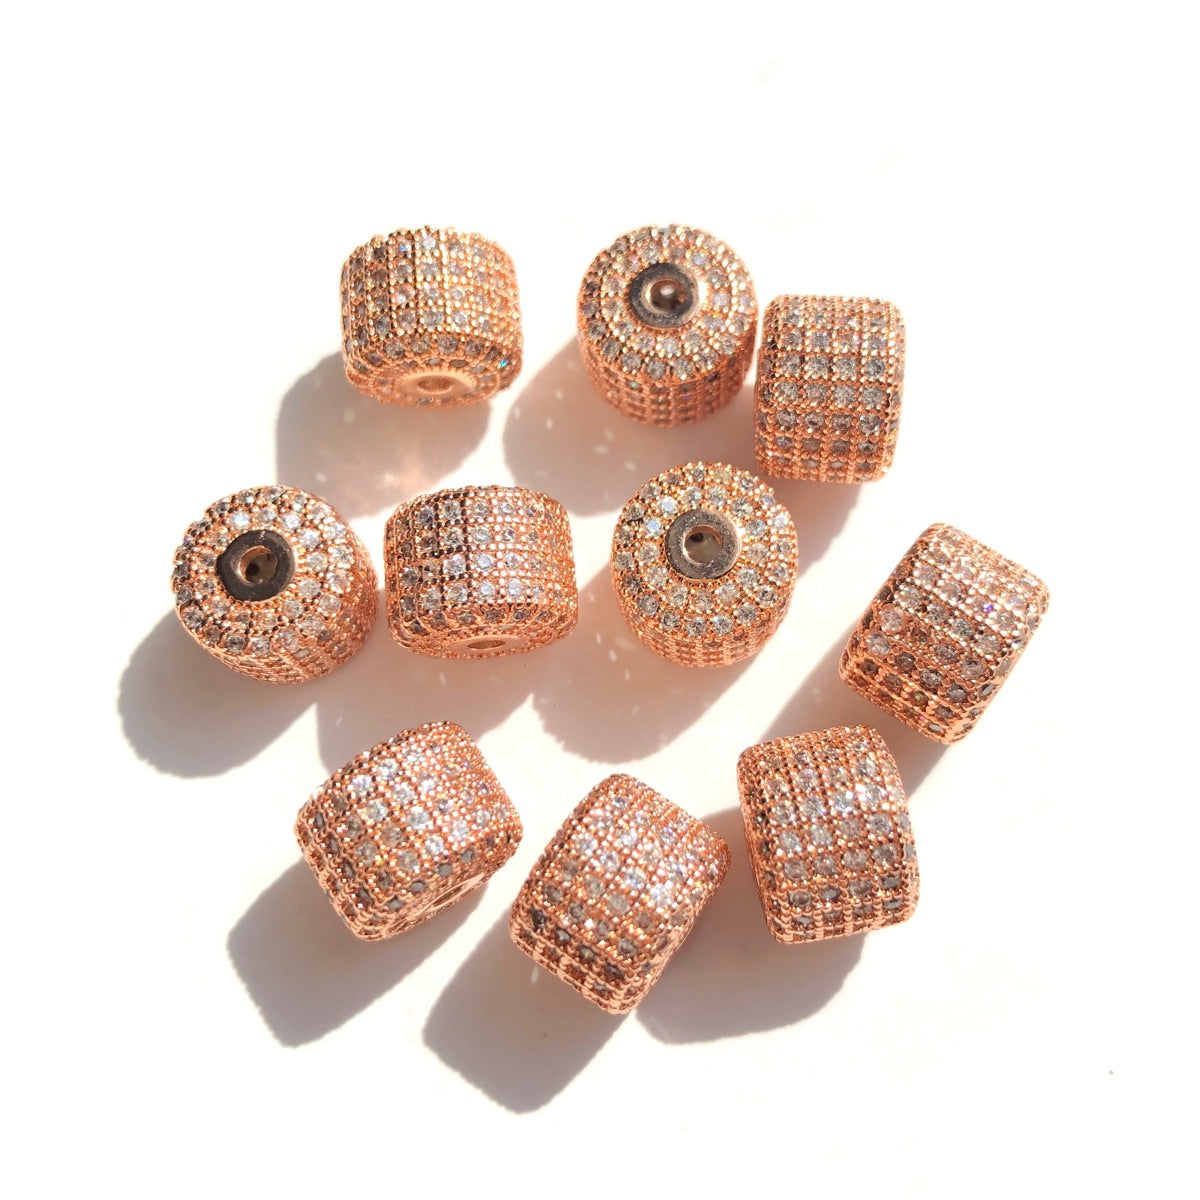 10-20pcs/lot 9.6*7.4mm CZ Paved Wheel Spacers Clear on Rose Gold CZ Paved Spacers New Spacers Arrivals Rondelle Beads Charms Beads Beyond